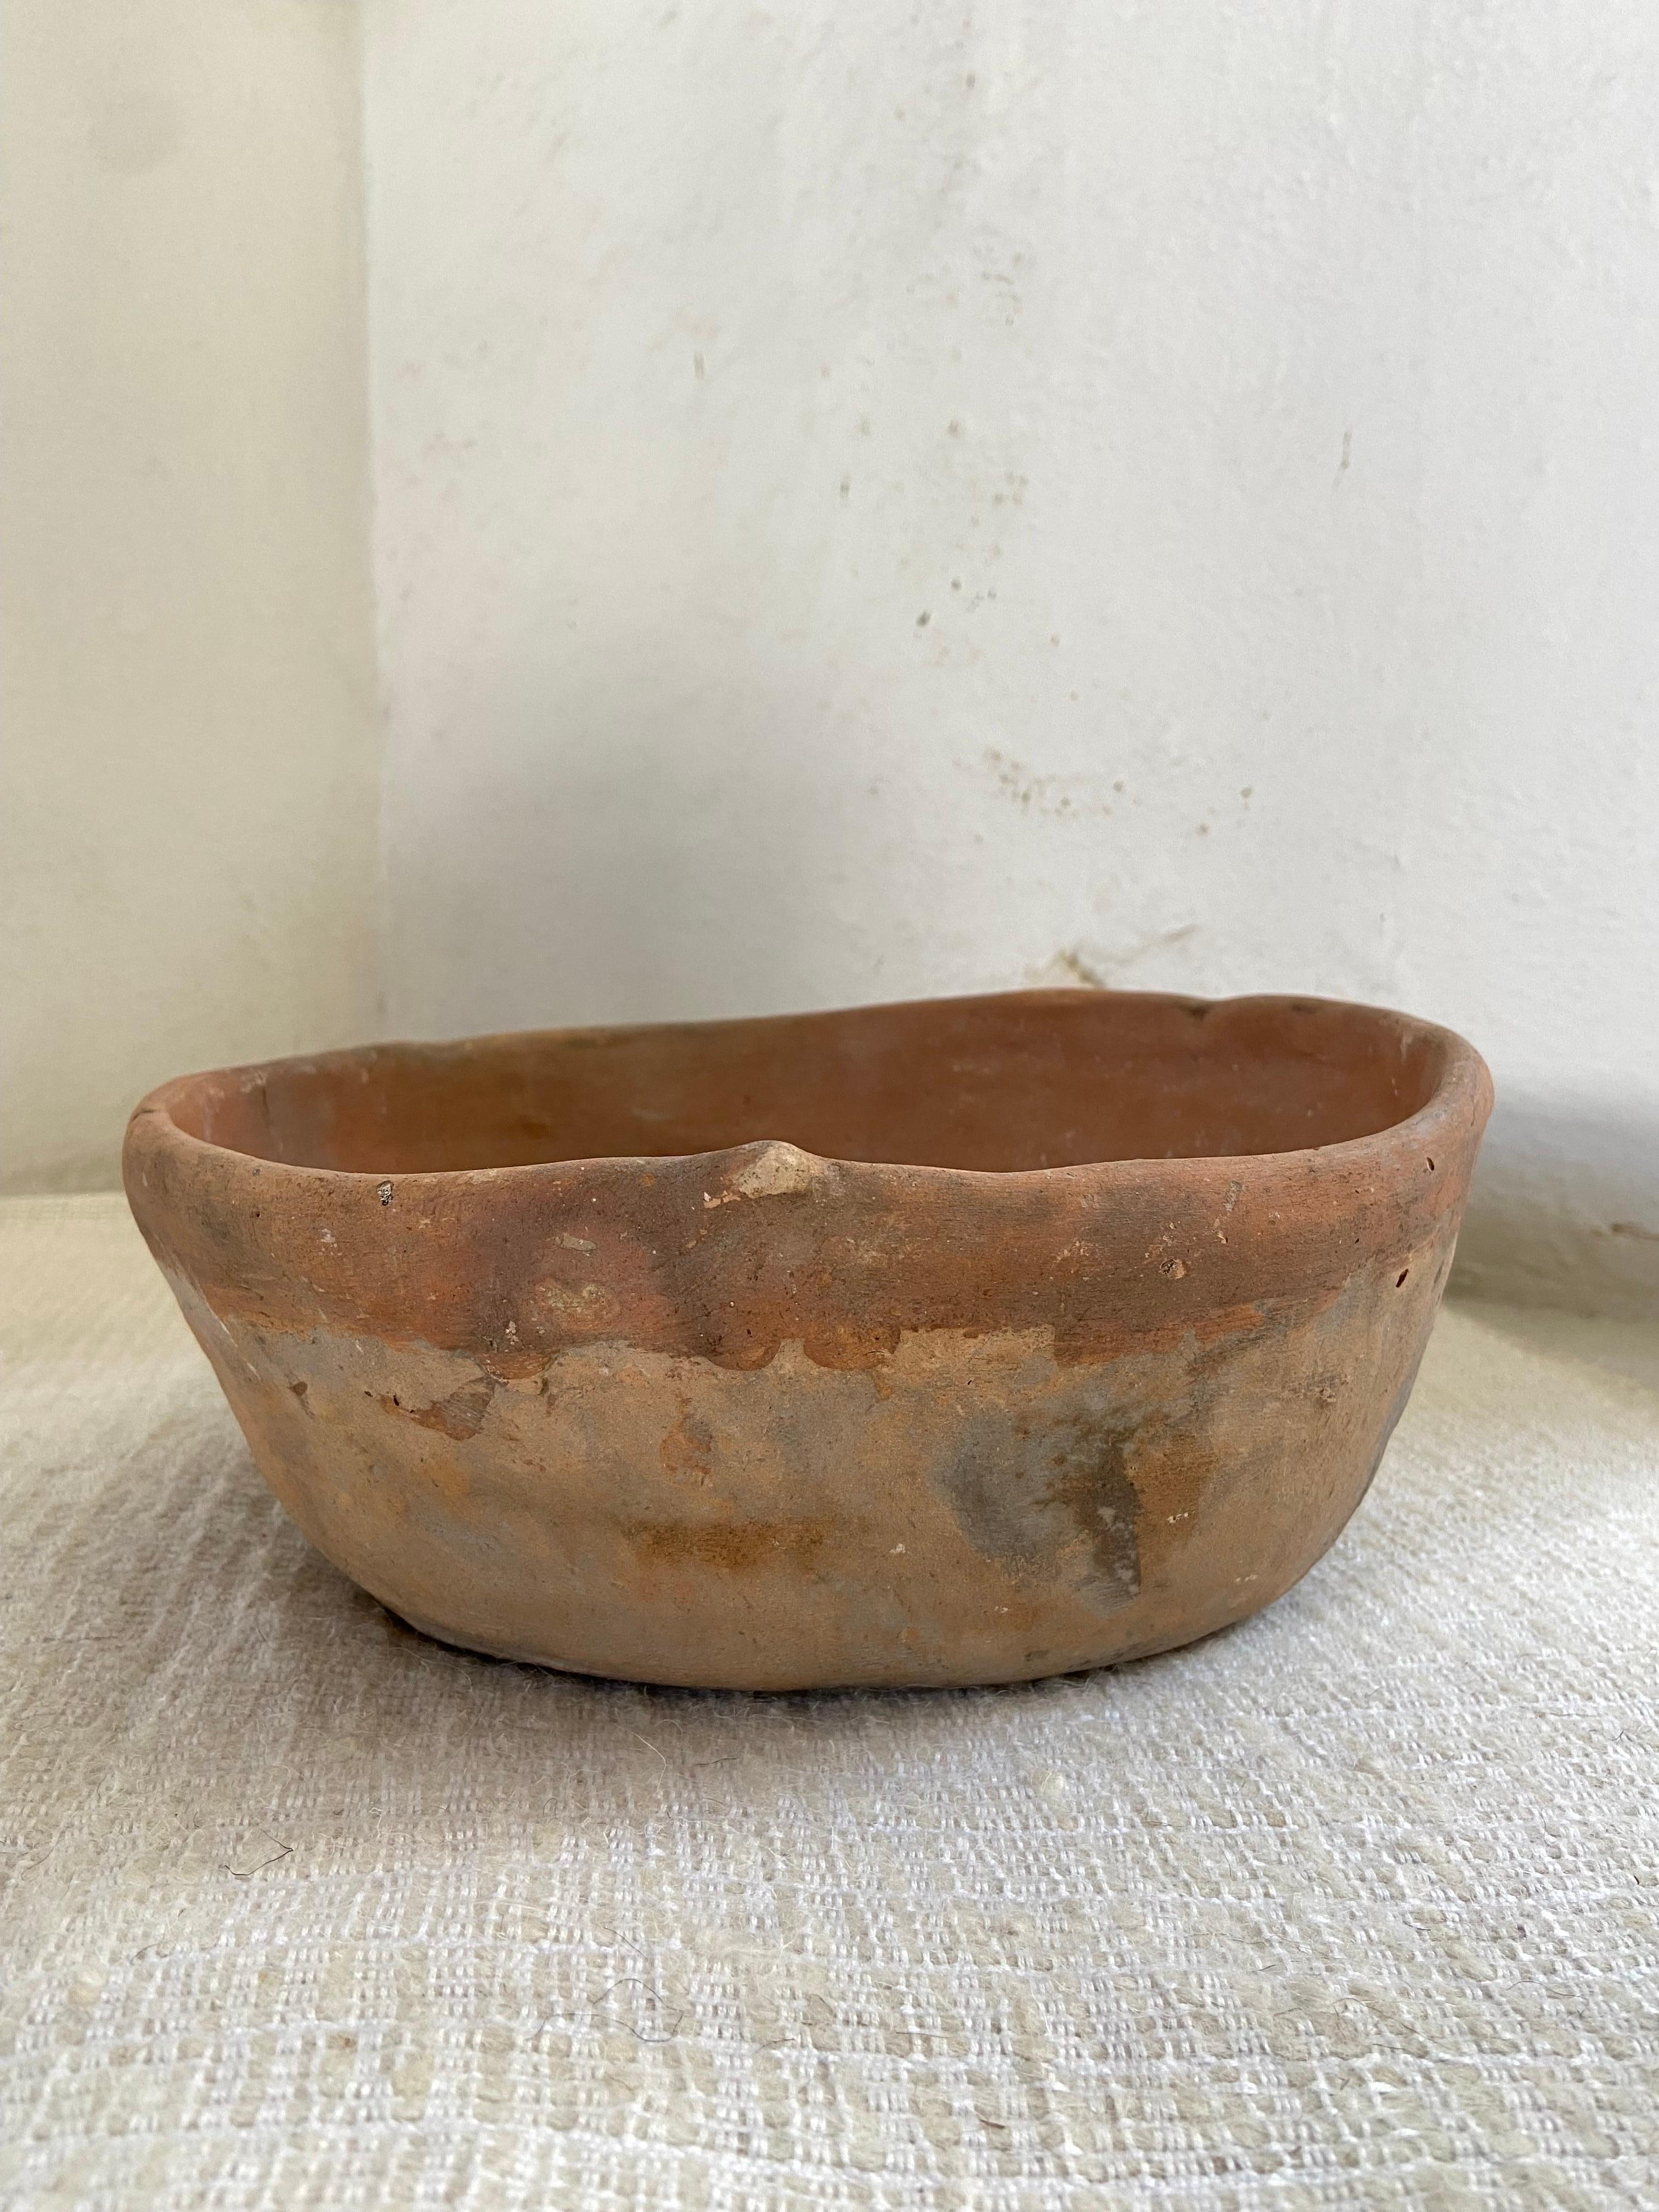 Primitive Mid-20th Century Terracotta Bowl from Mexico For Sale